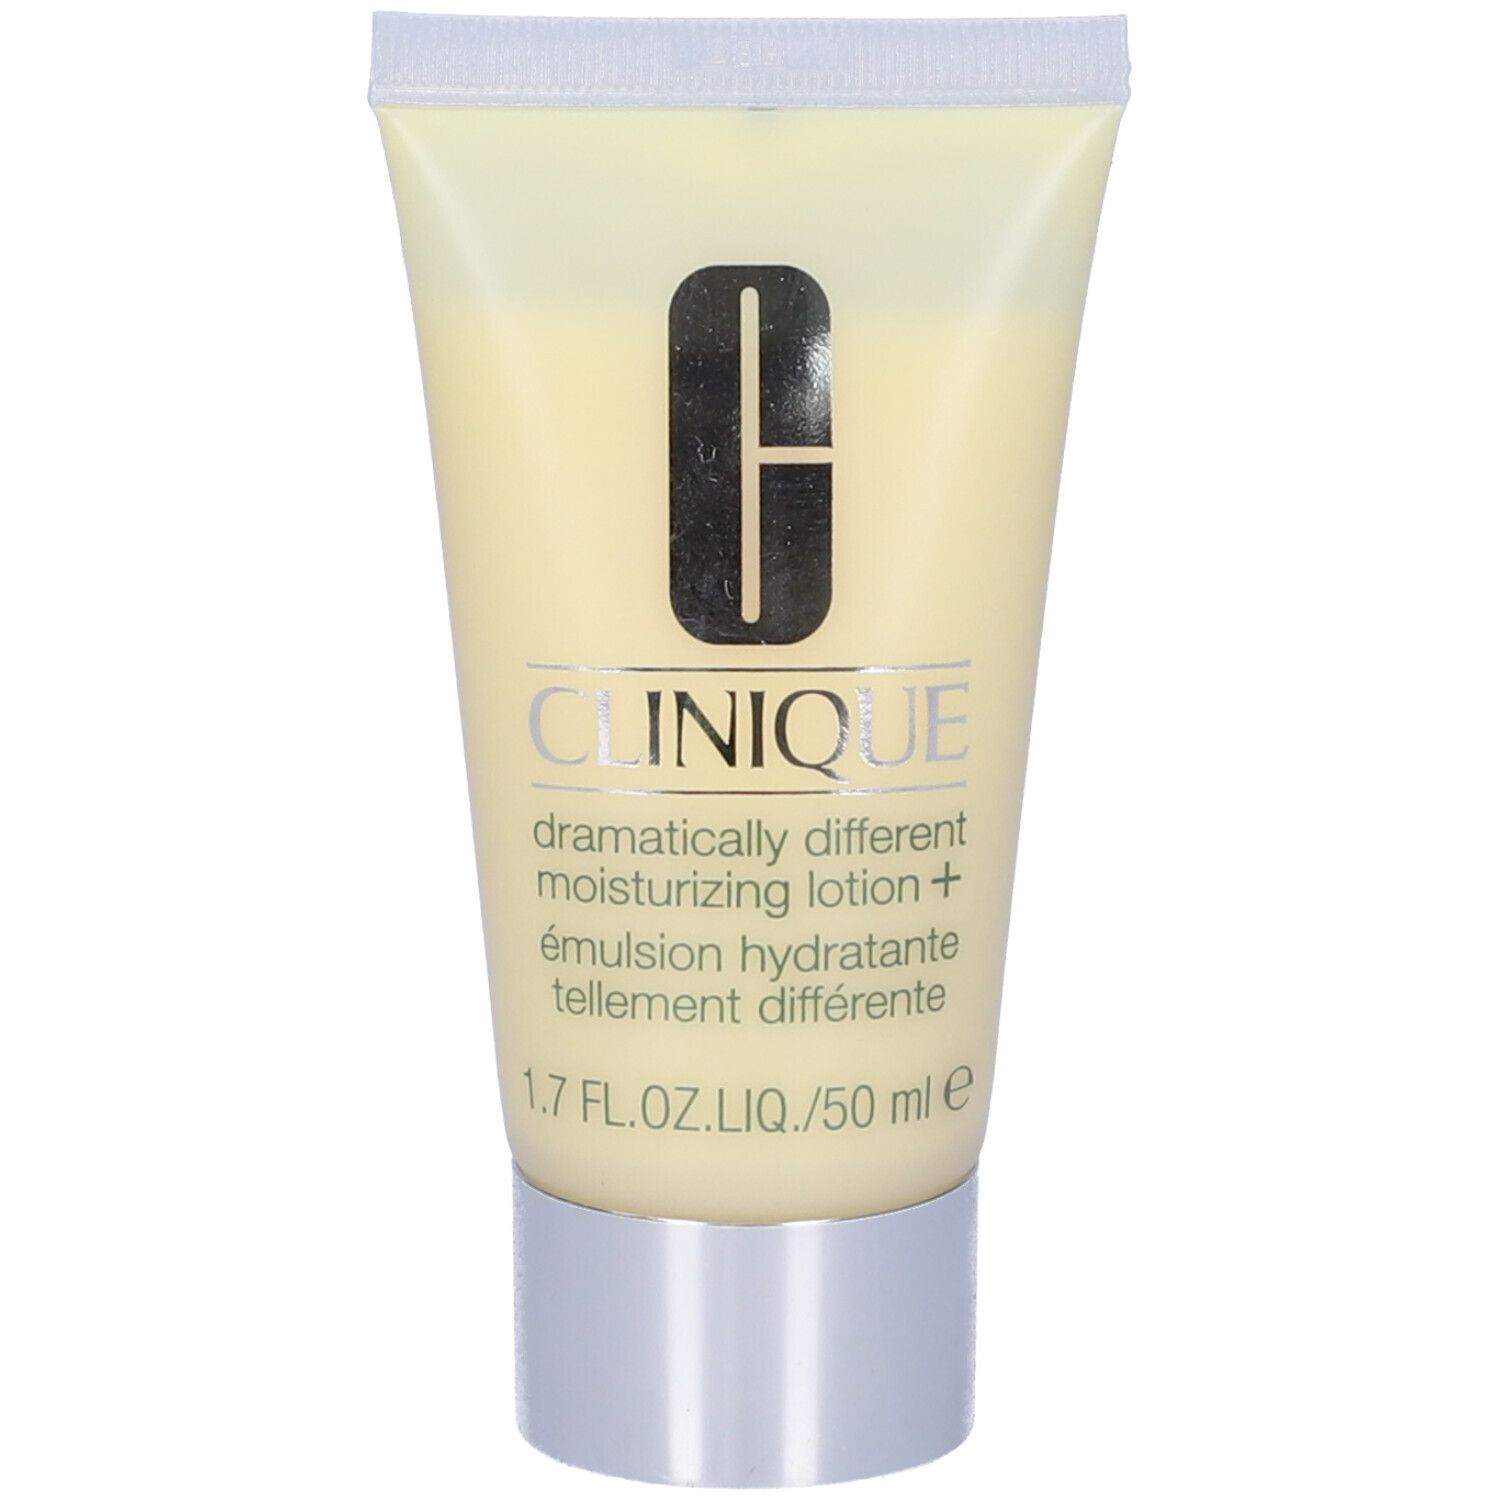 Image of Clinique Dramatically Different Moisturizing Lotion+